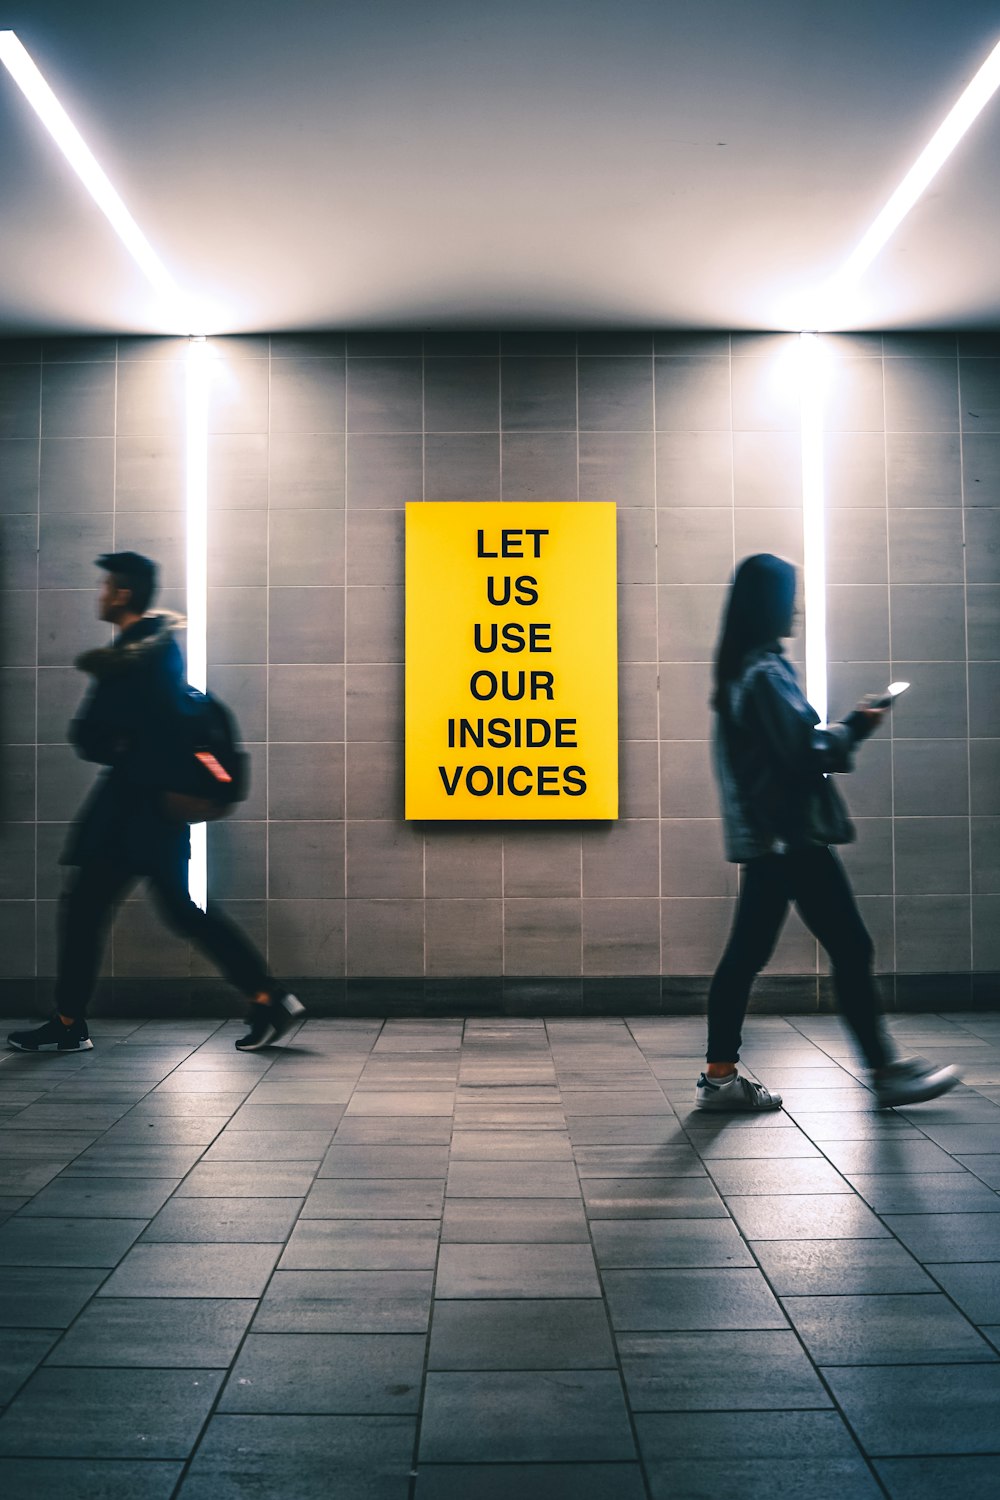 man and woman walking inside building near Let us use our inside voices sign